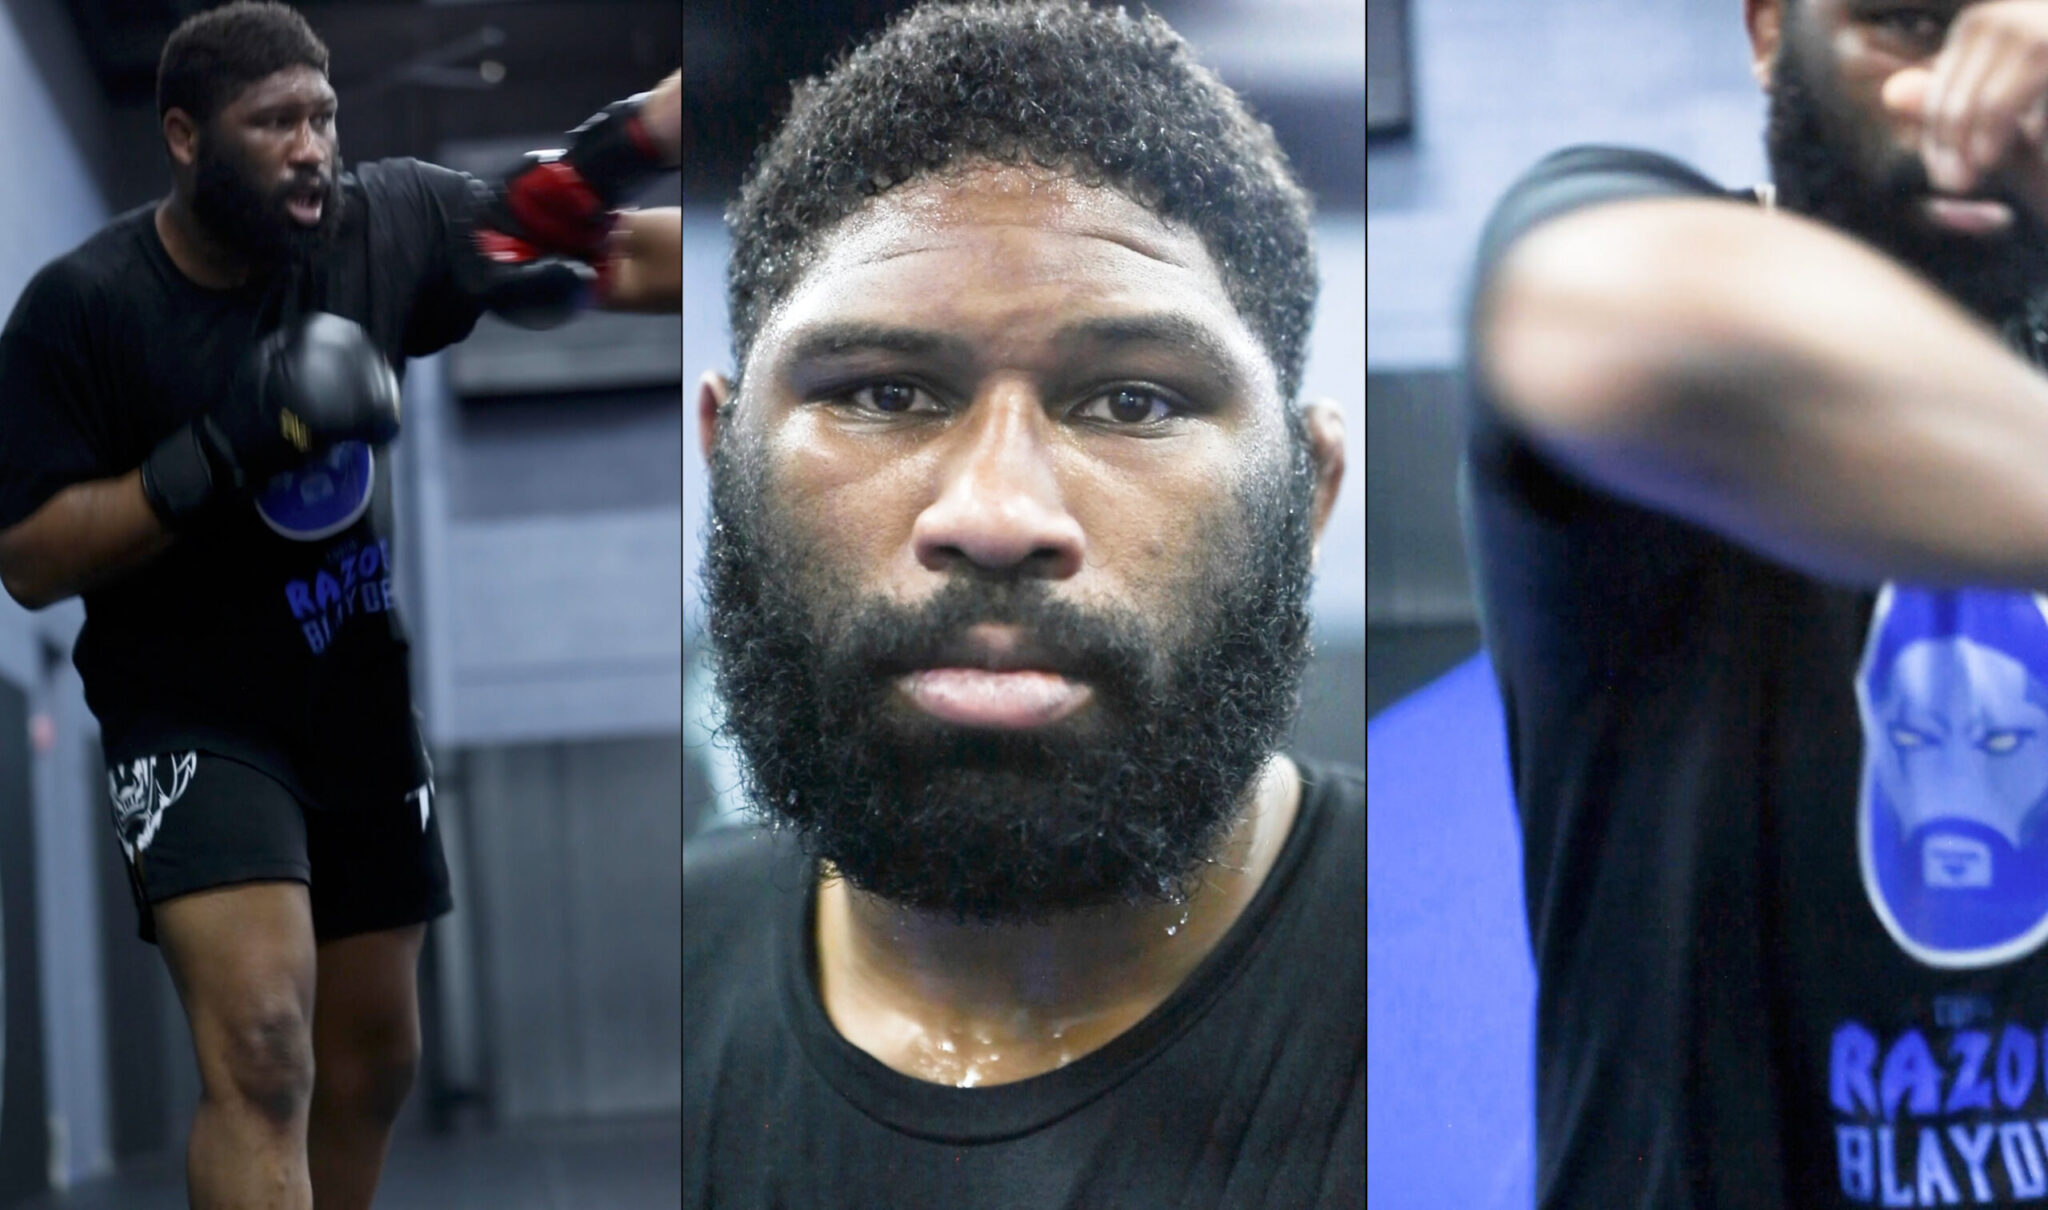 curtis blaydes professional ufc fighter photos by jeff fried